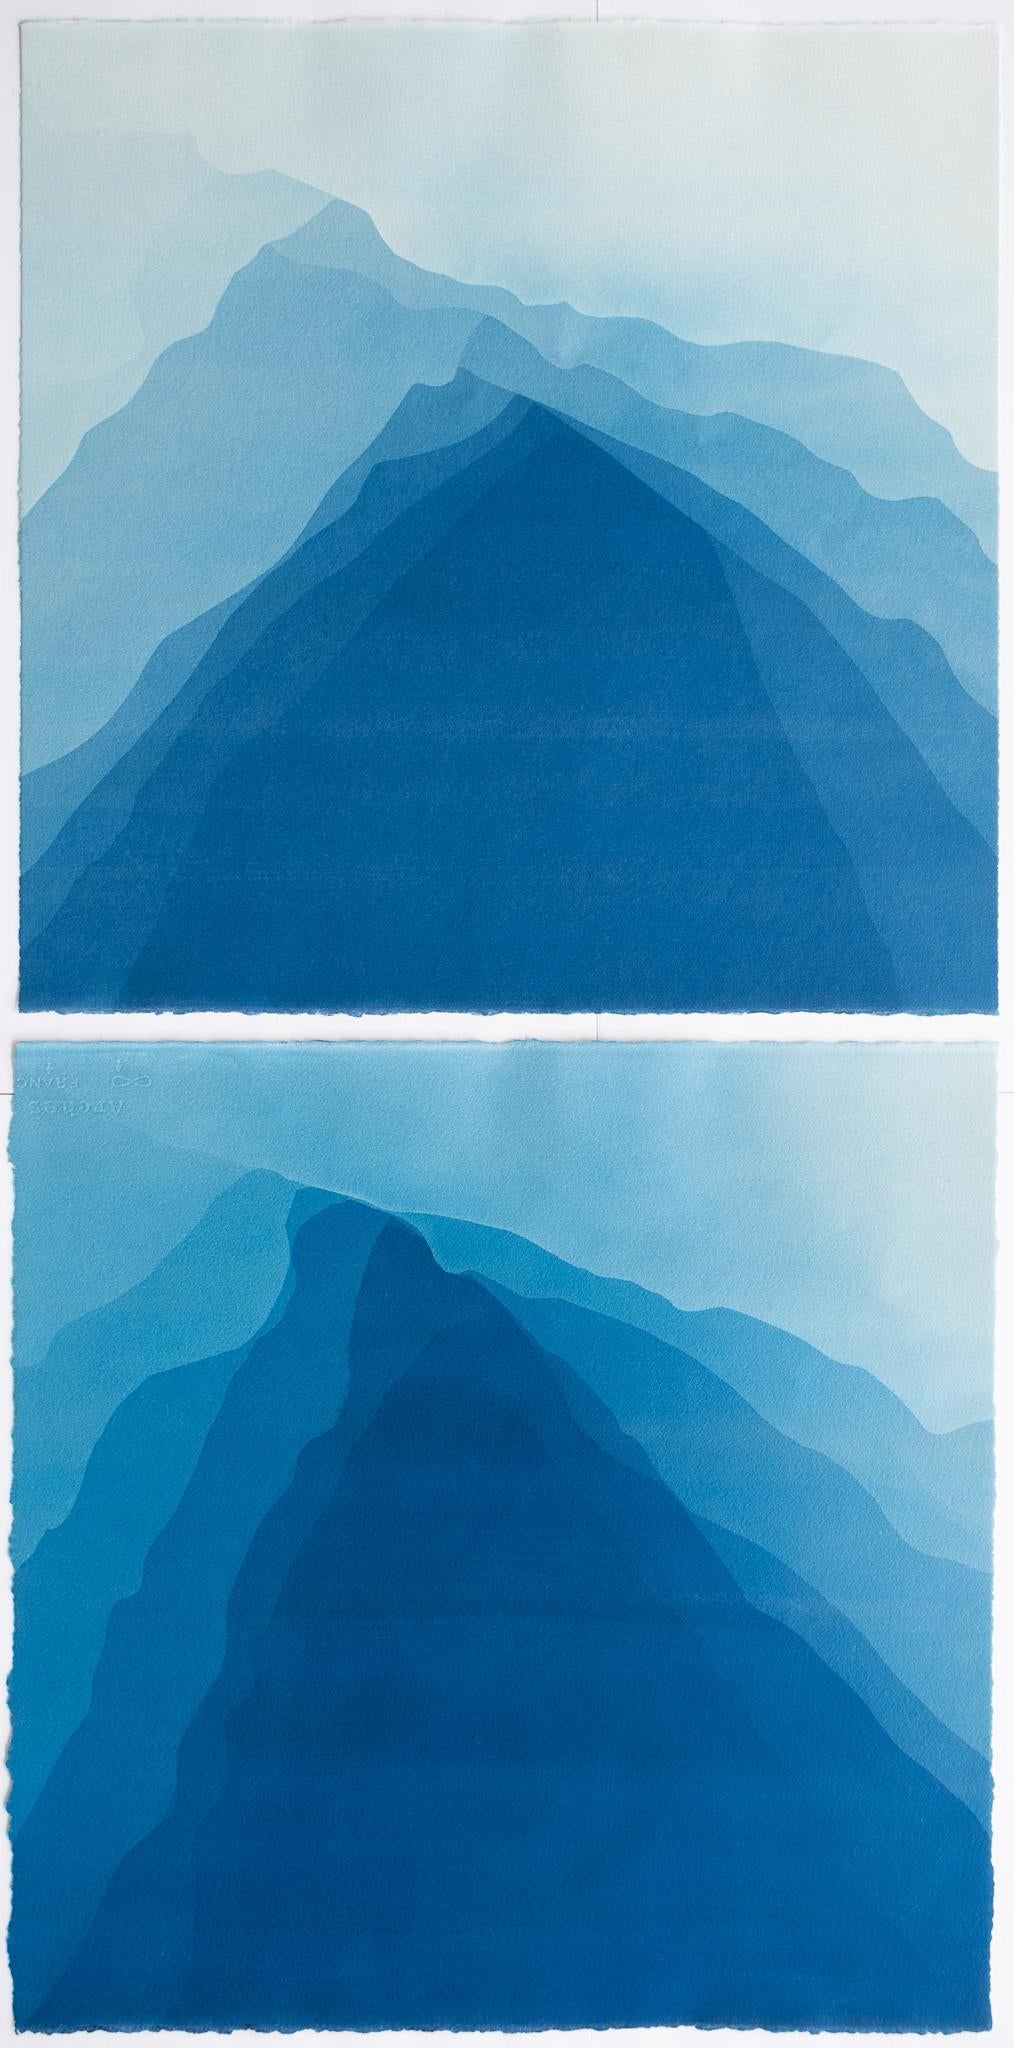 Highest Mountain Diptych II (Two hand-printed 22 x 22 inch abstract cyanotypes)